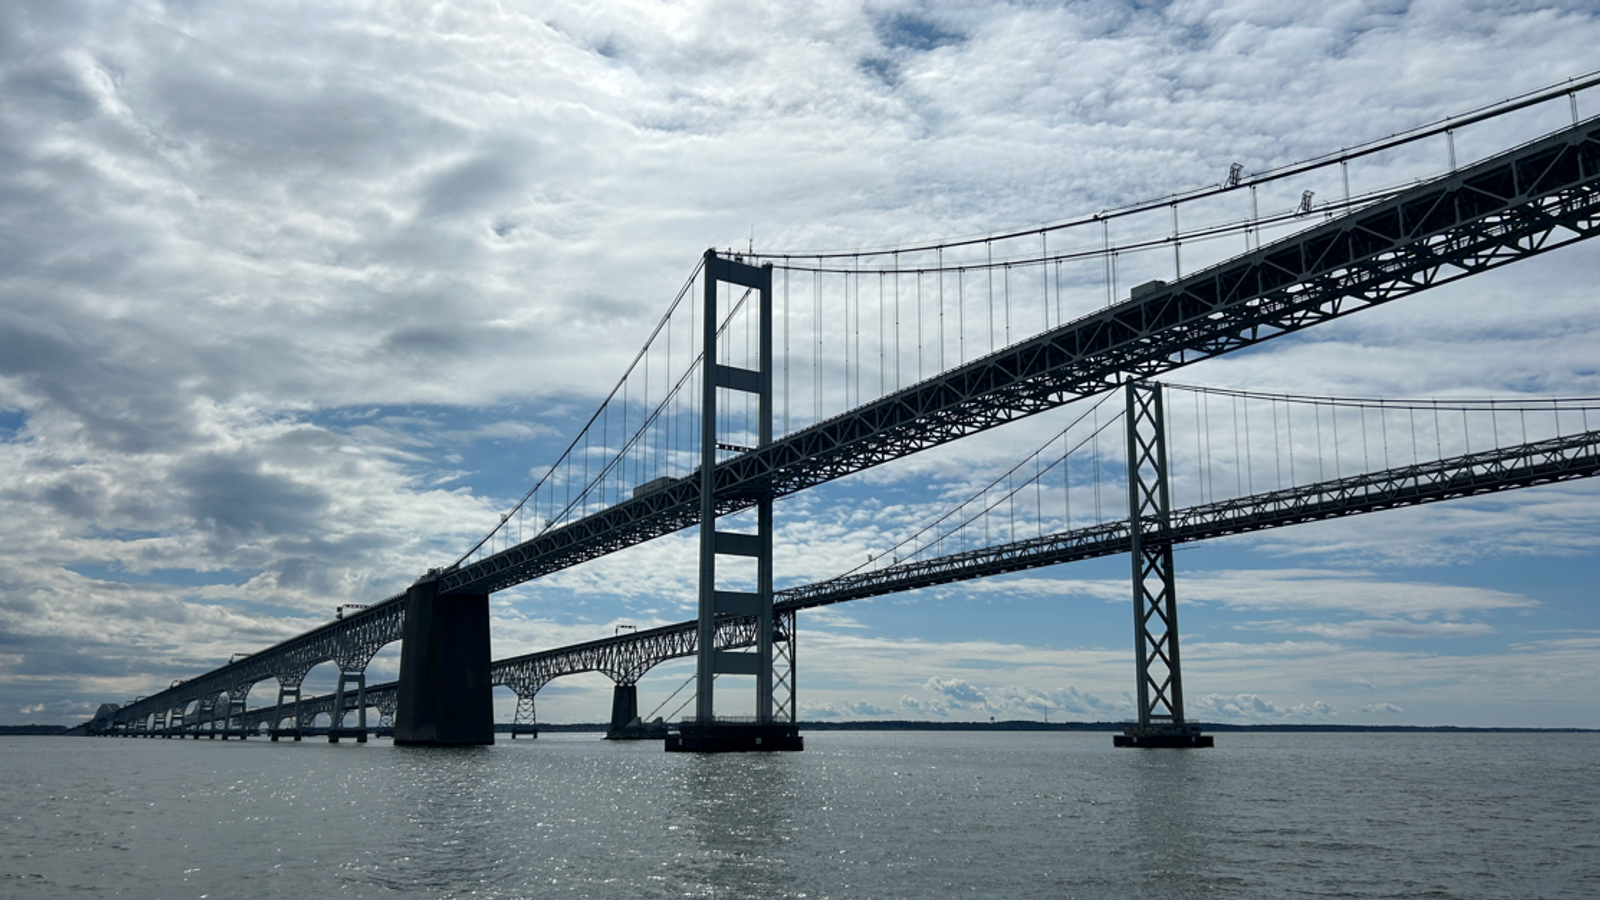 Maryland: Chesapeake Bay Bridge dubbed the 'scariest' in America - but could disaster strike again?